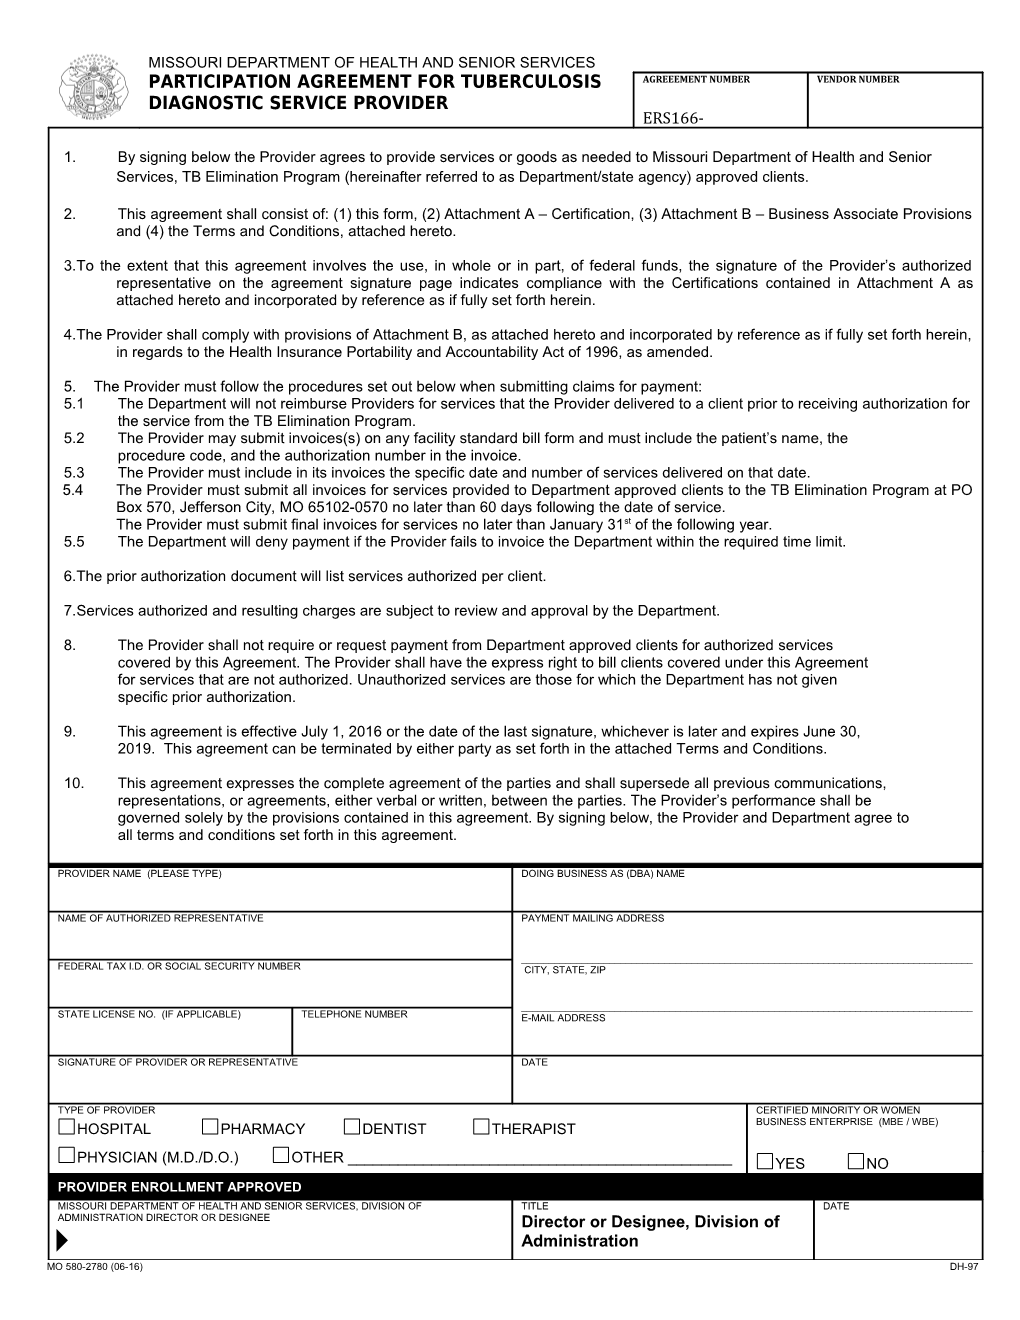 Participation Agreement for Tuberculosis